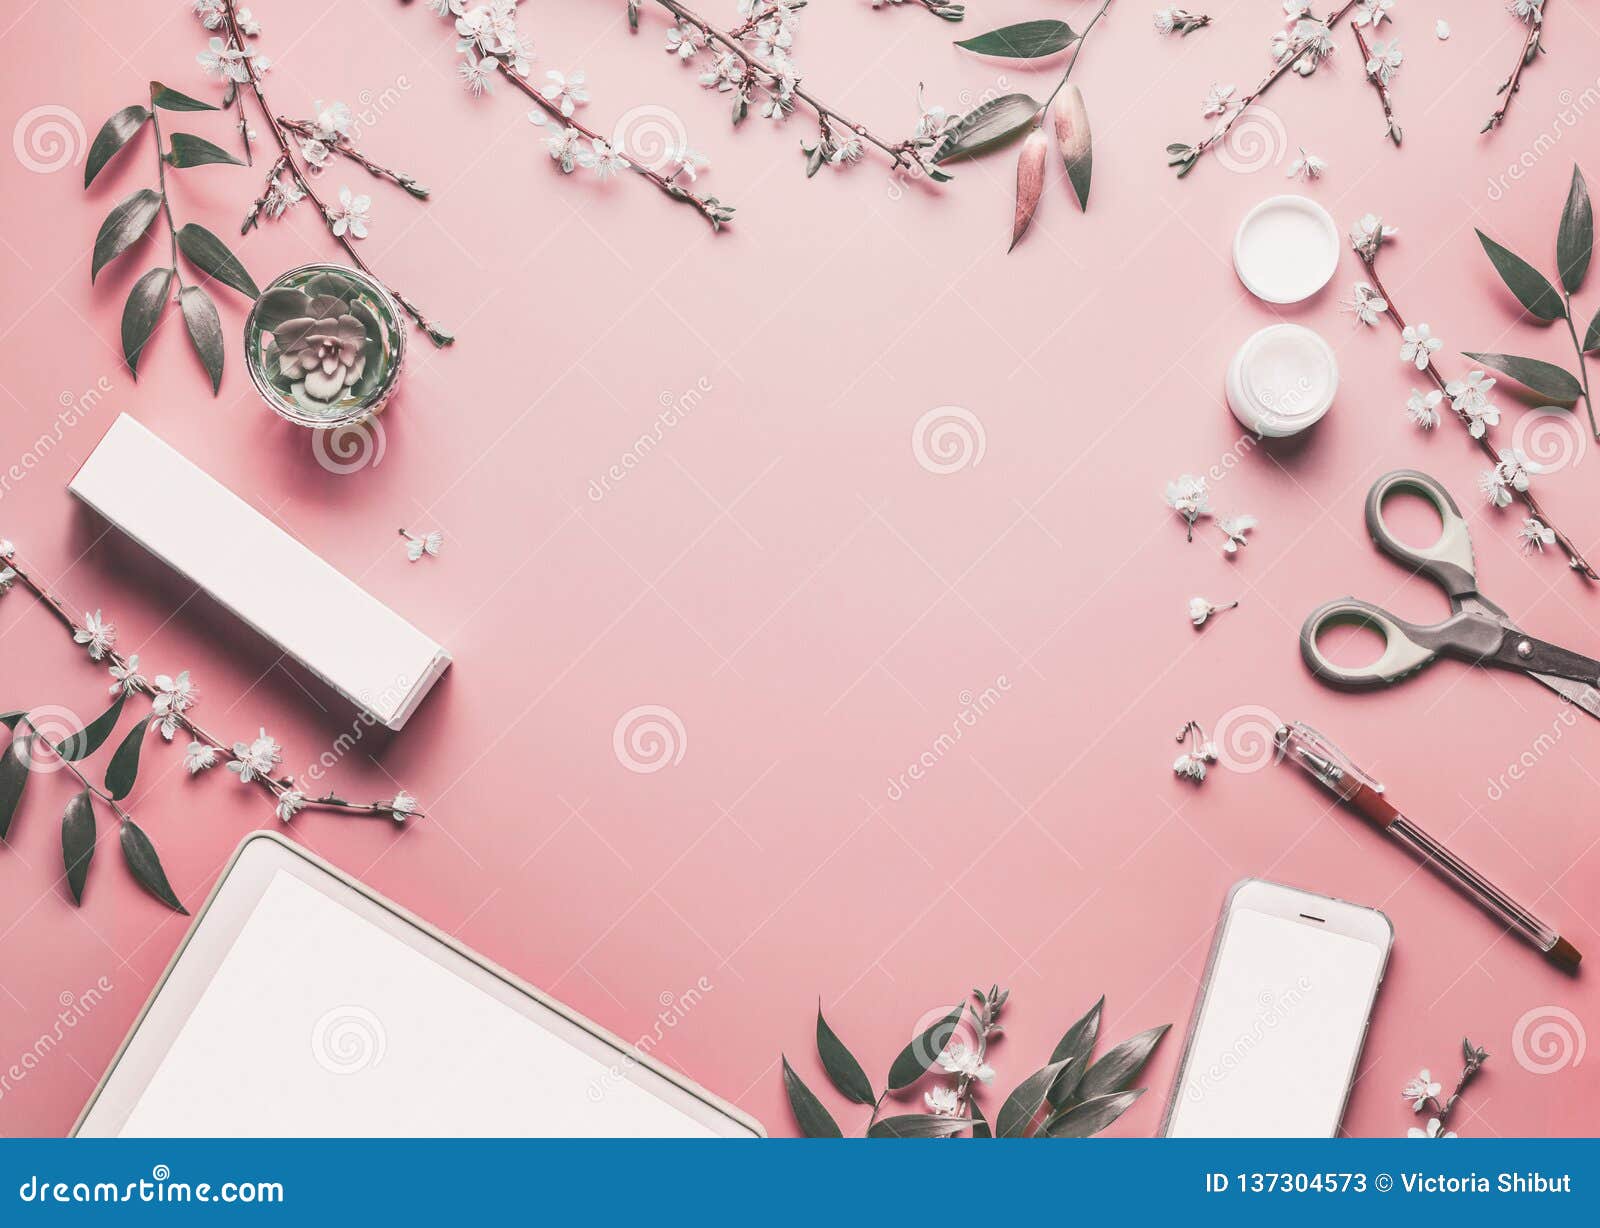 Smartphone and Tablet Pc Mock Up on Pastel Pink Desktop Background with  Modern Cosmetics, Stationery Supples and Blossom Branches Stock Image -  Image of background, layout: 137304573